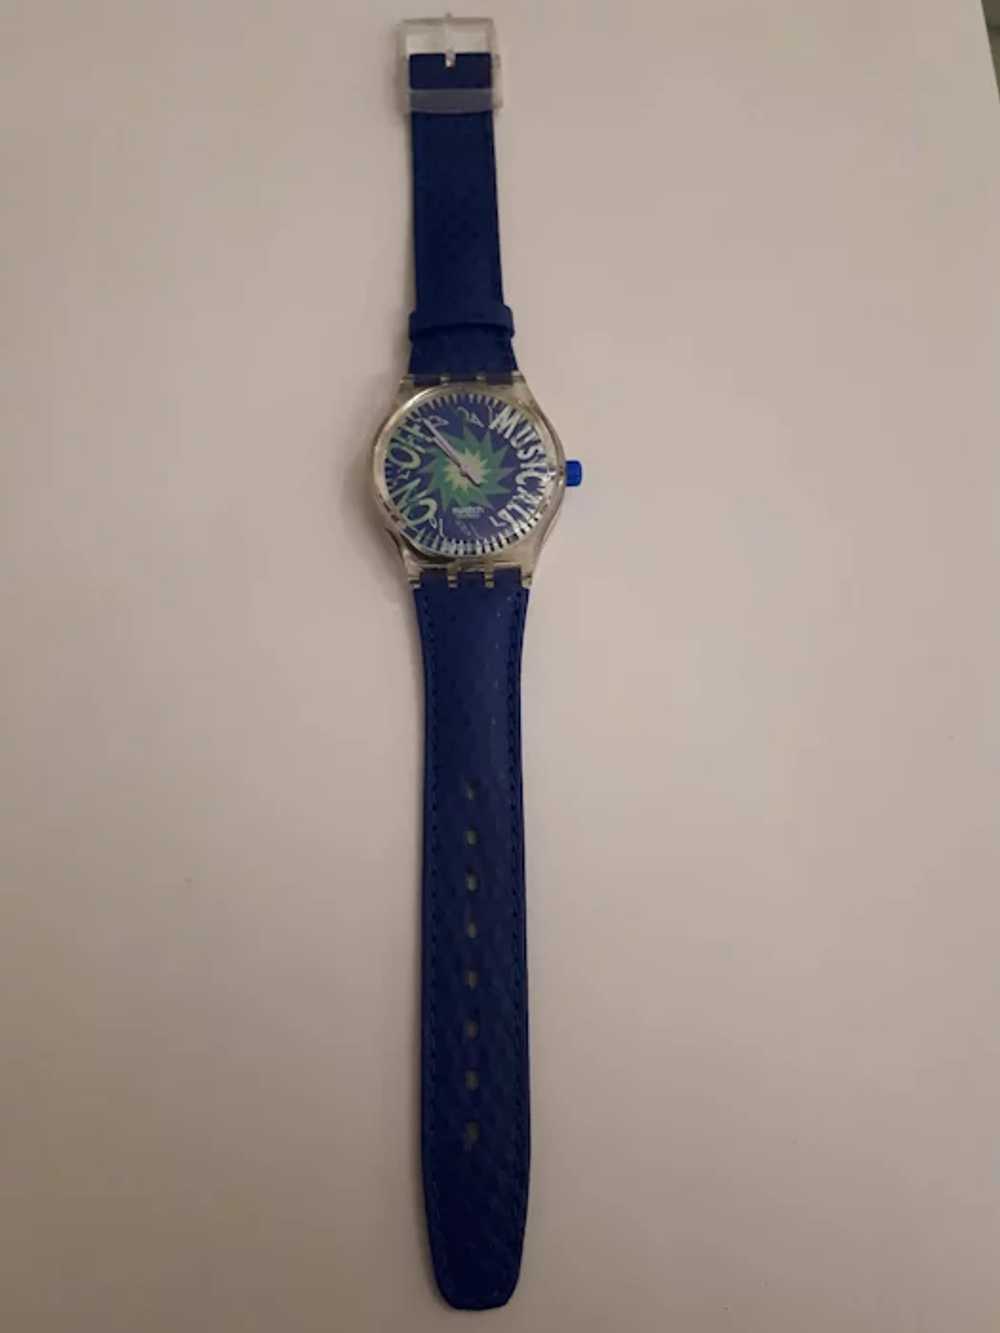 Swatch Watch Musicall SLK100 Tone in Blue 1993 Je… - image 2